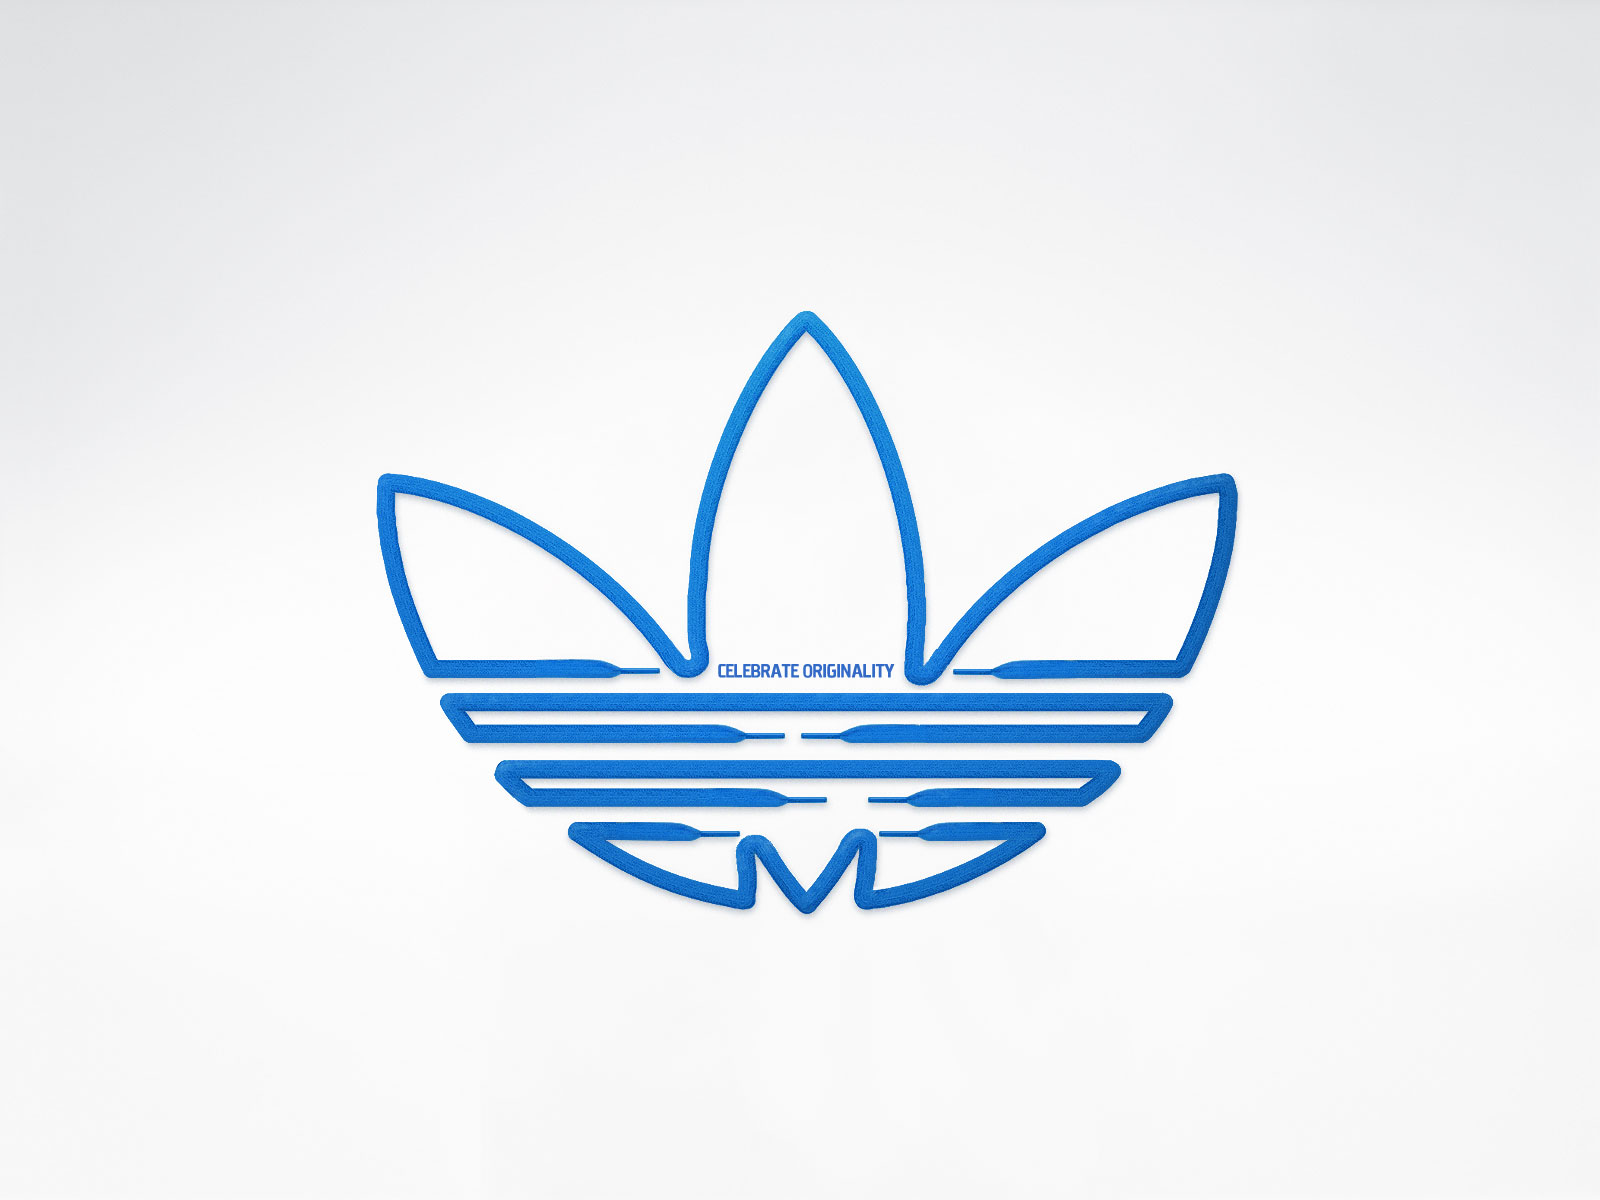 adidasoriginals off 60% - www.charcuterie-tradition-charrier.com